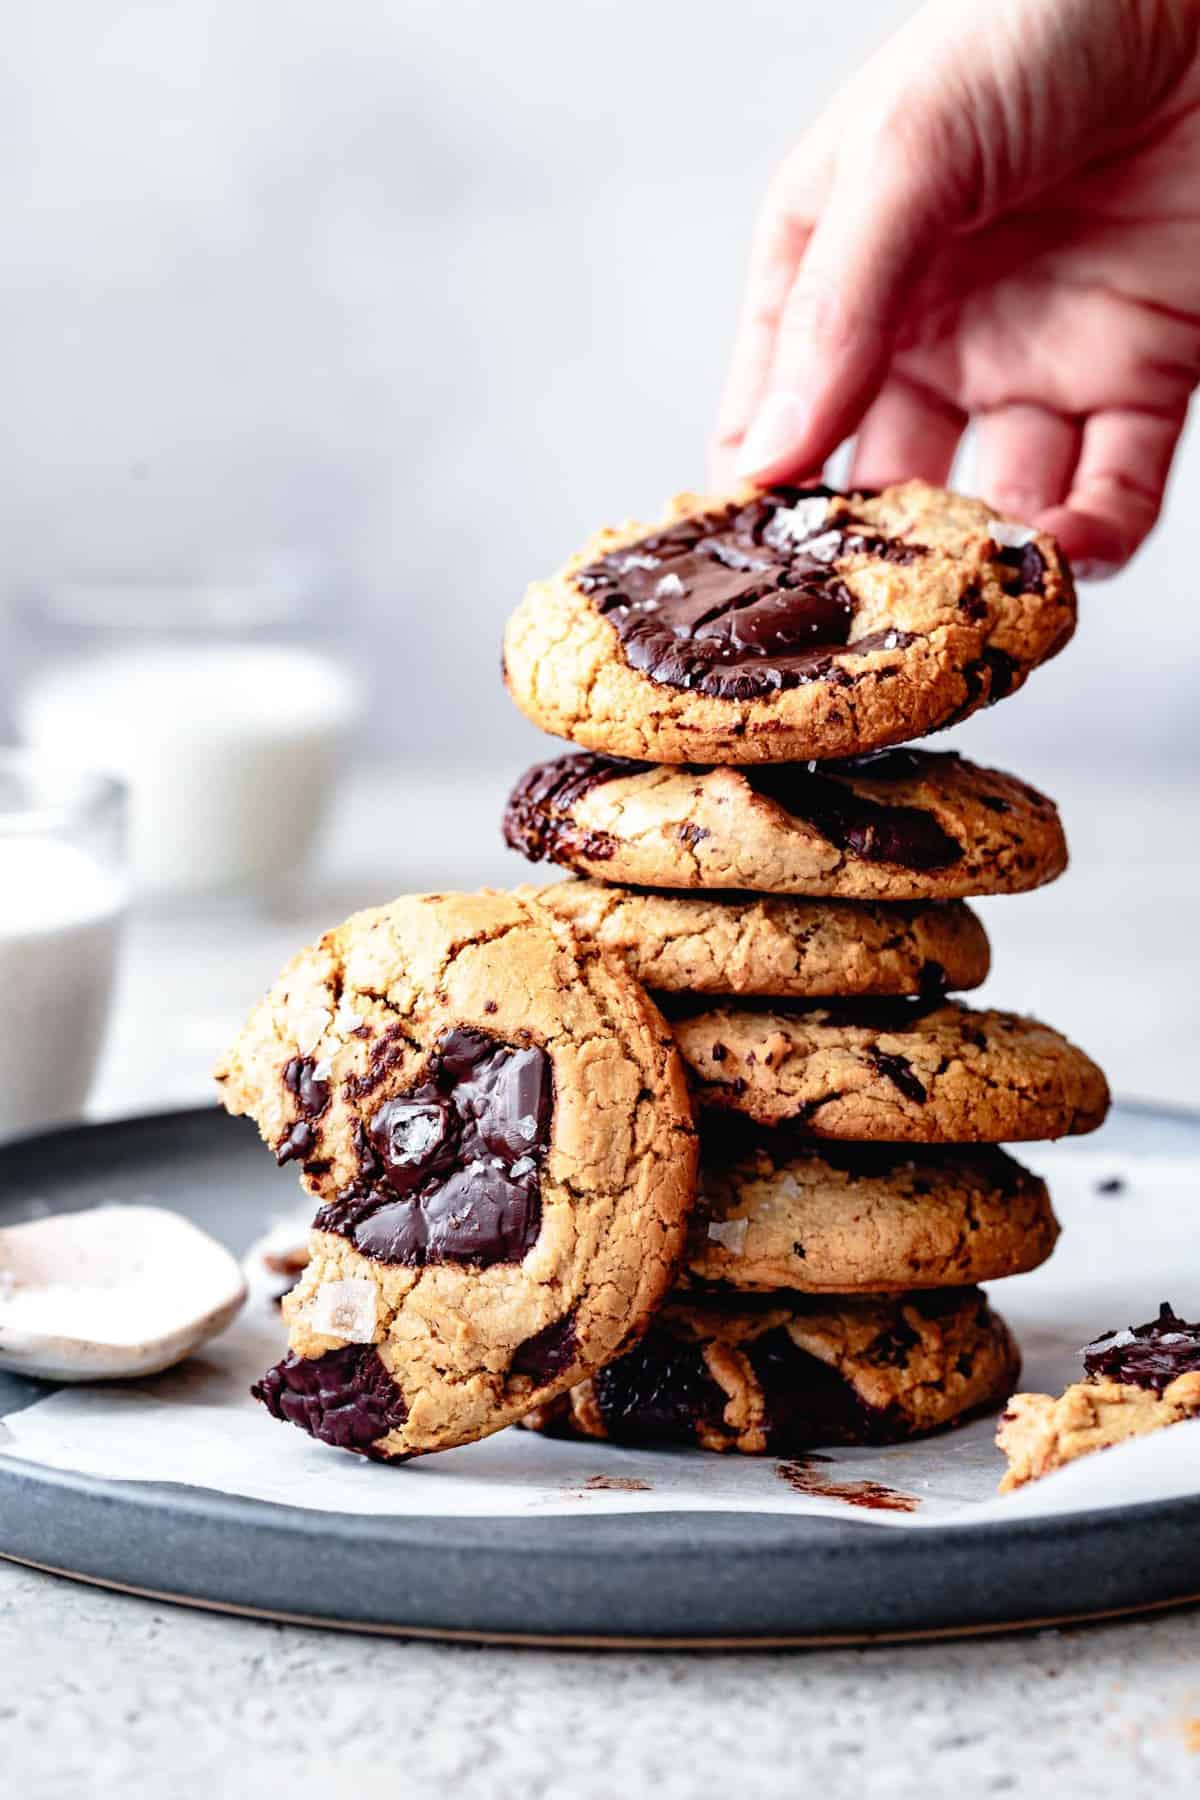 A stack of vegan grain-free chocolate chip cookies on a plate